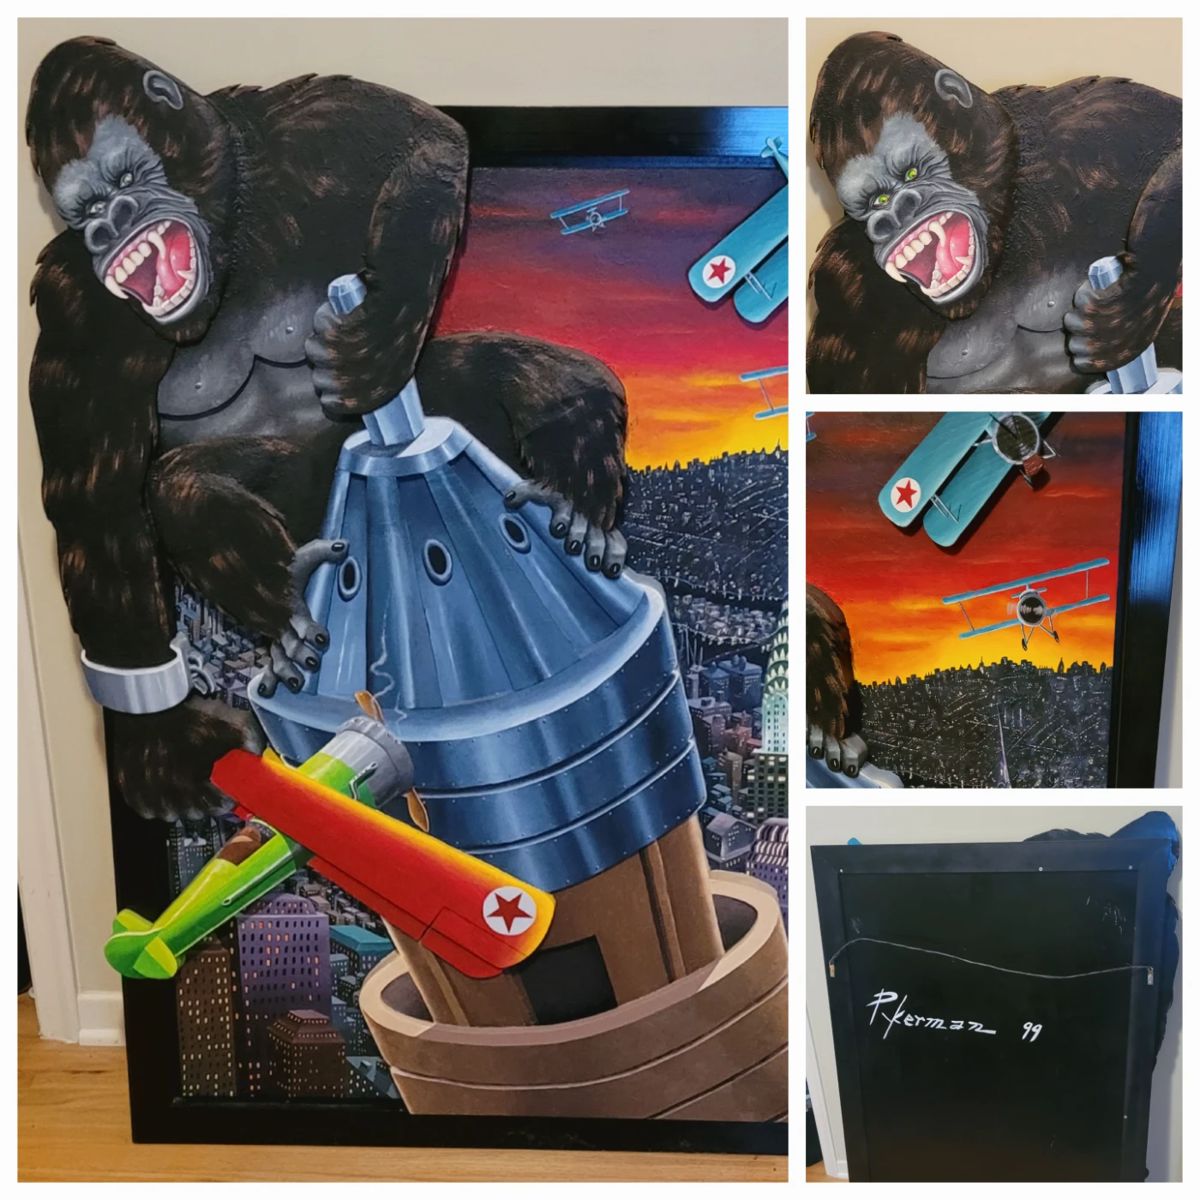 Wonderful King Kong multi layer dimensional painting on wood by well known Canadian artist Jeff Pykerman in 1999. This was a special commissioned piece by a well known national collector.
This information well be shared with the buyer. $7500.00